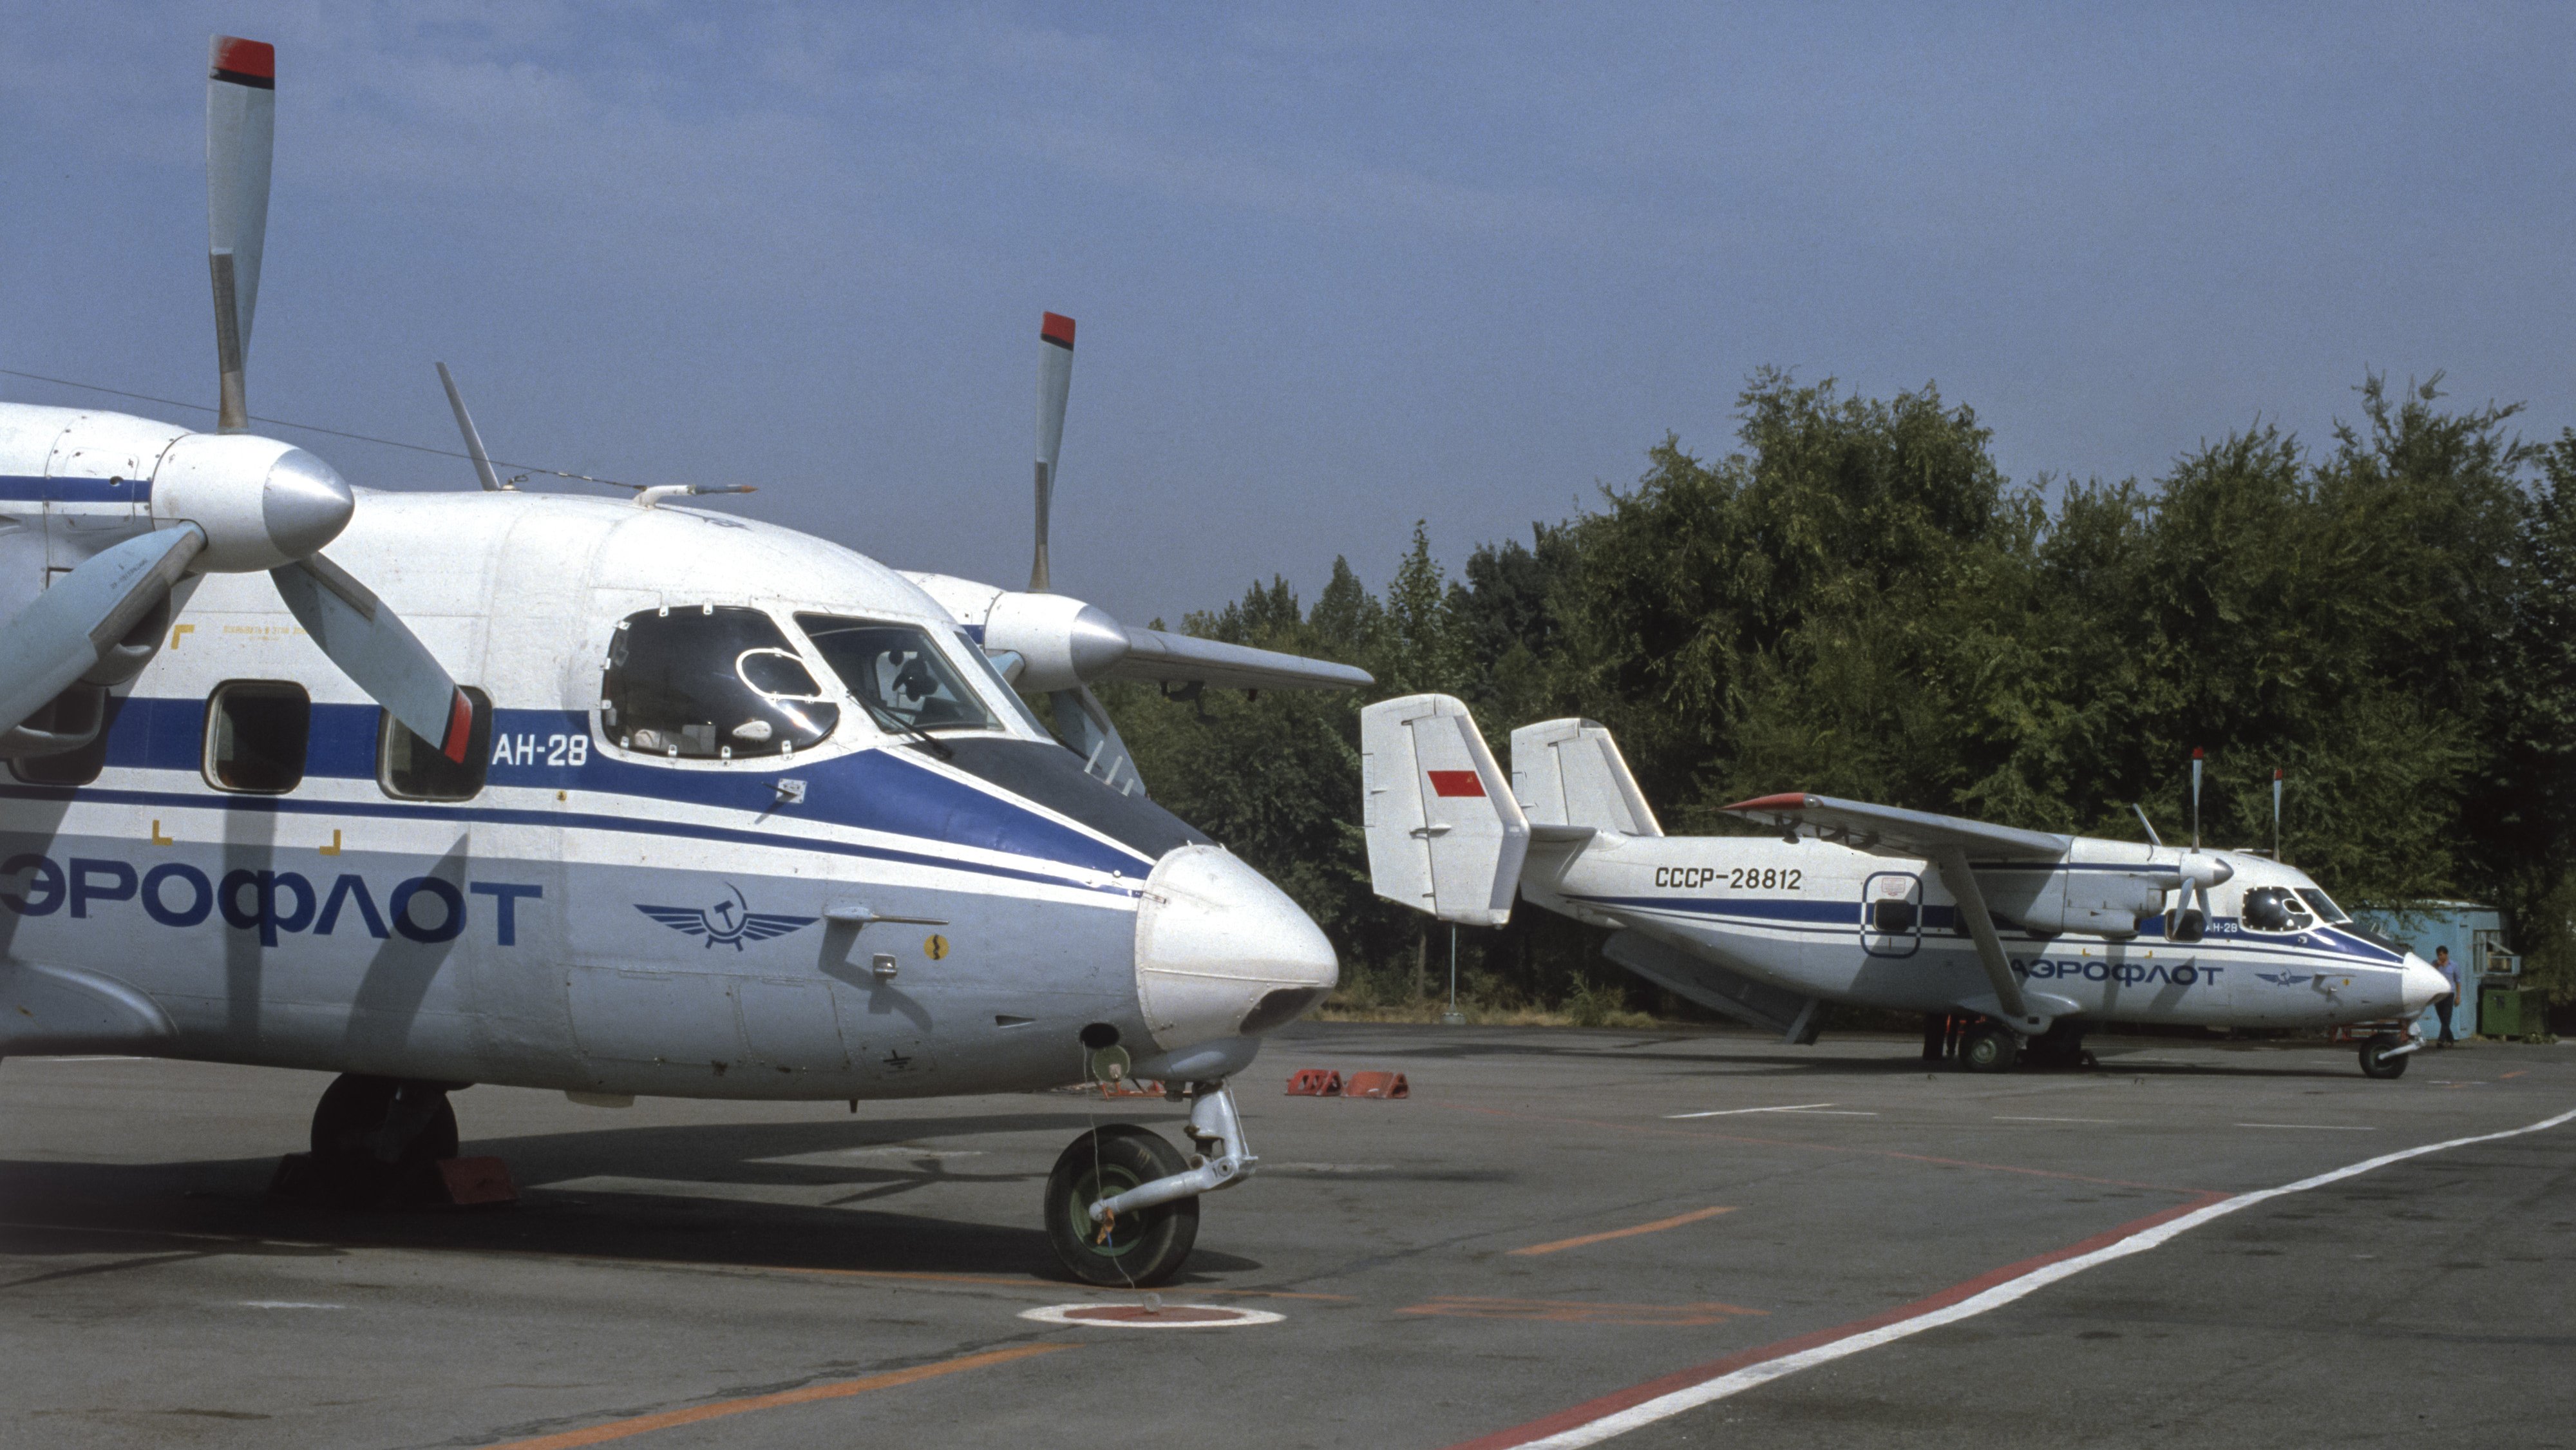 Two Antonov An-28 regional airplanes of Aeroflot Soviet Airlines pictured at Khorog airport